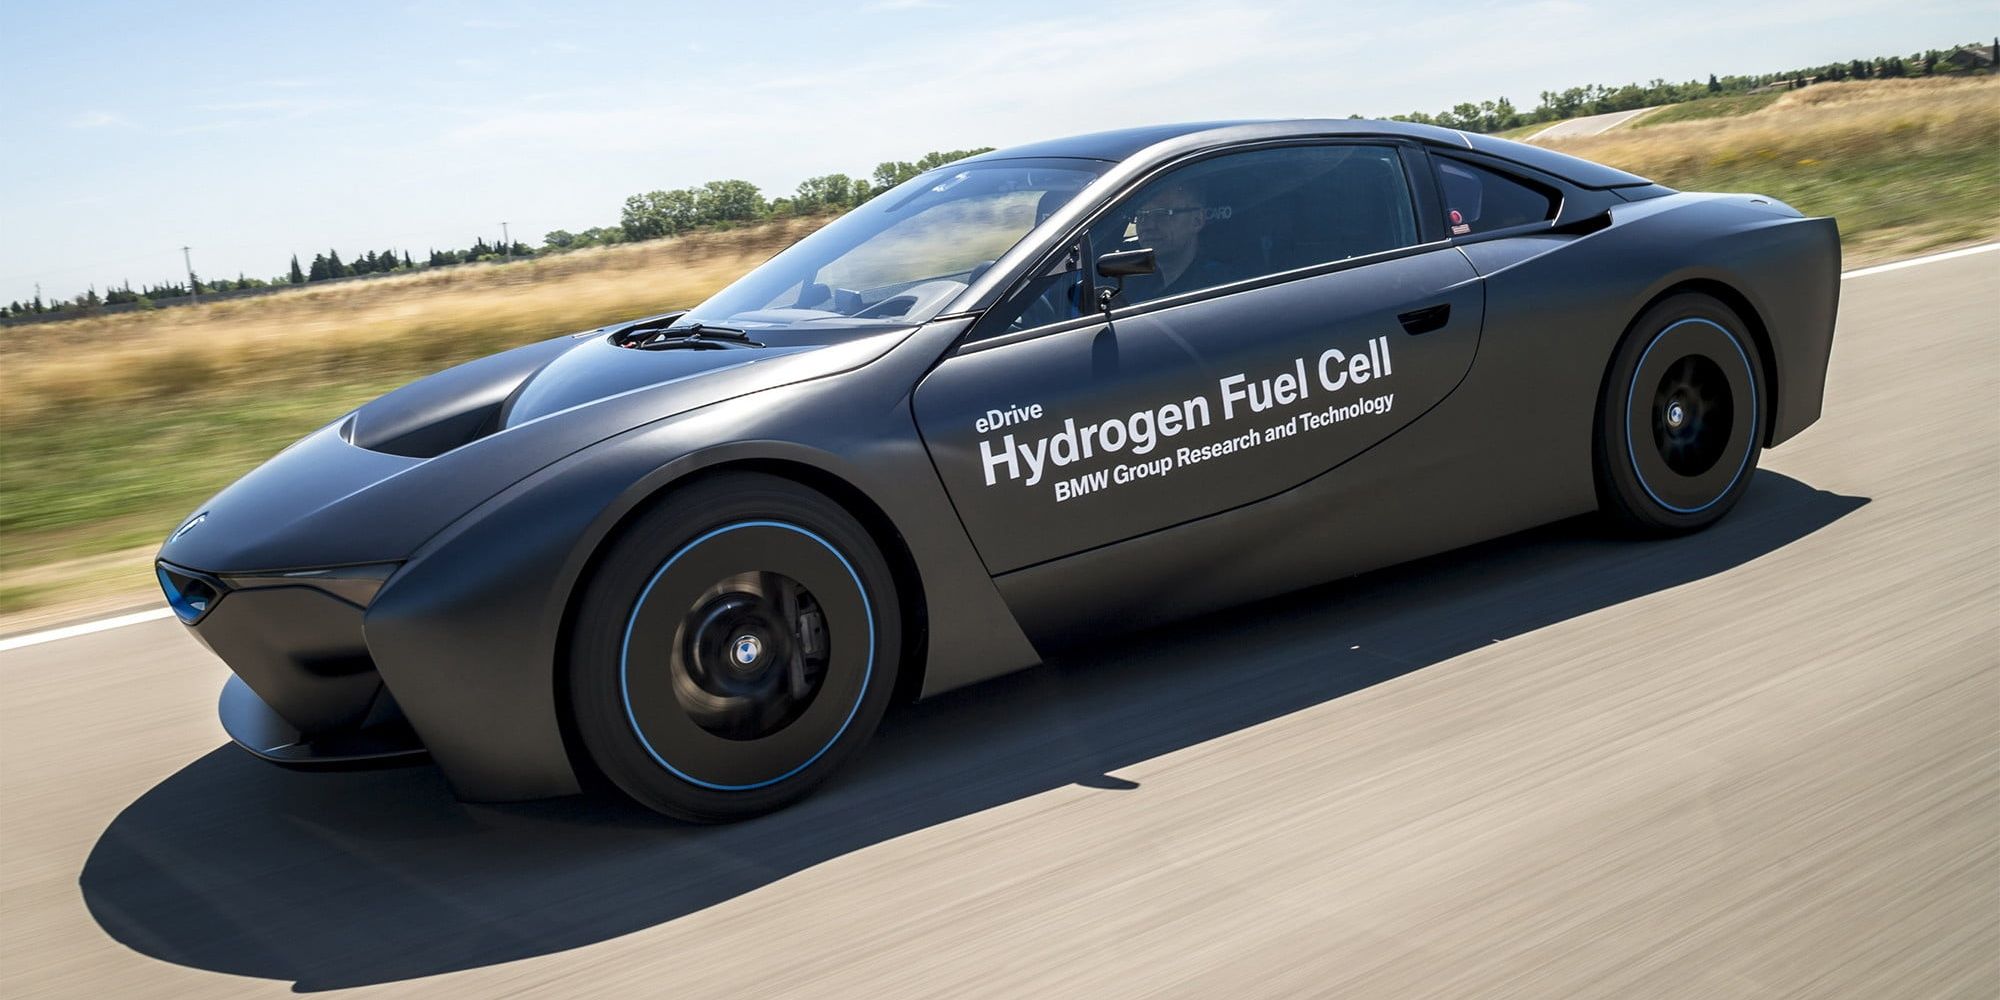 10 Things You Need To Know About Hydrogen FuelCell Cars